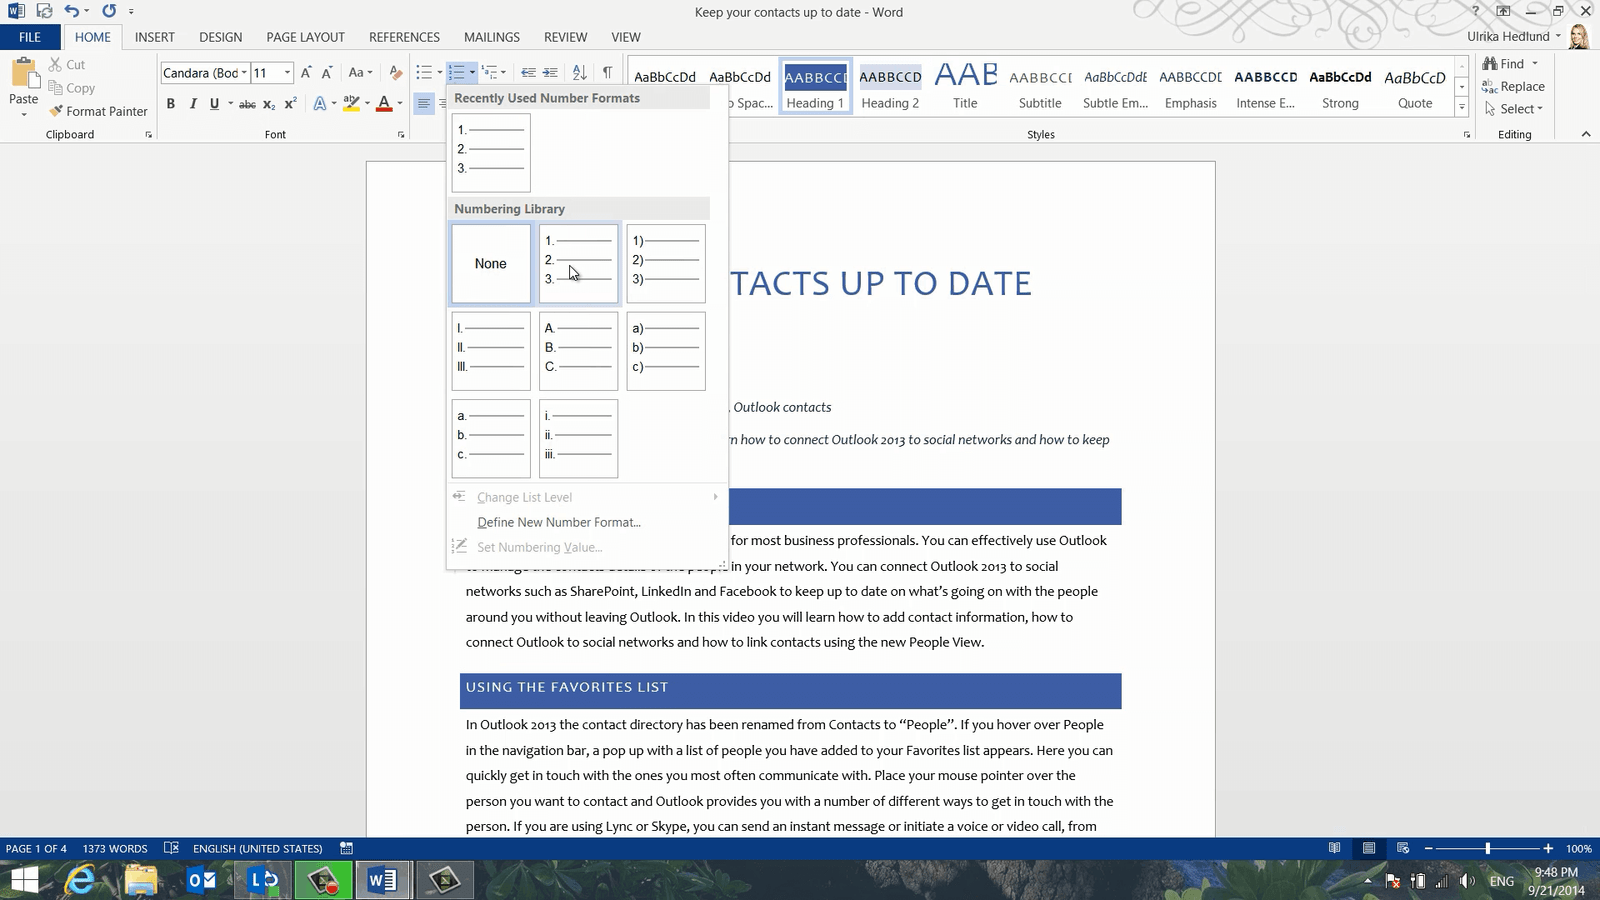 how to apply shaded style set in word 2013